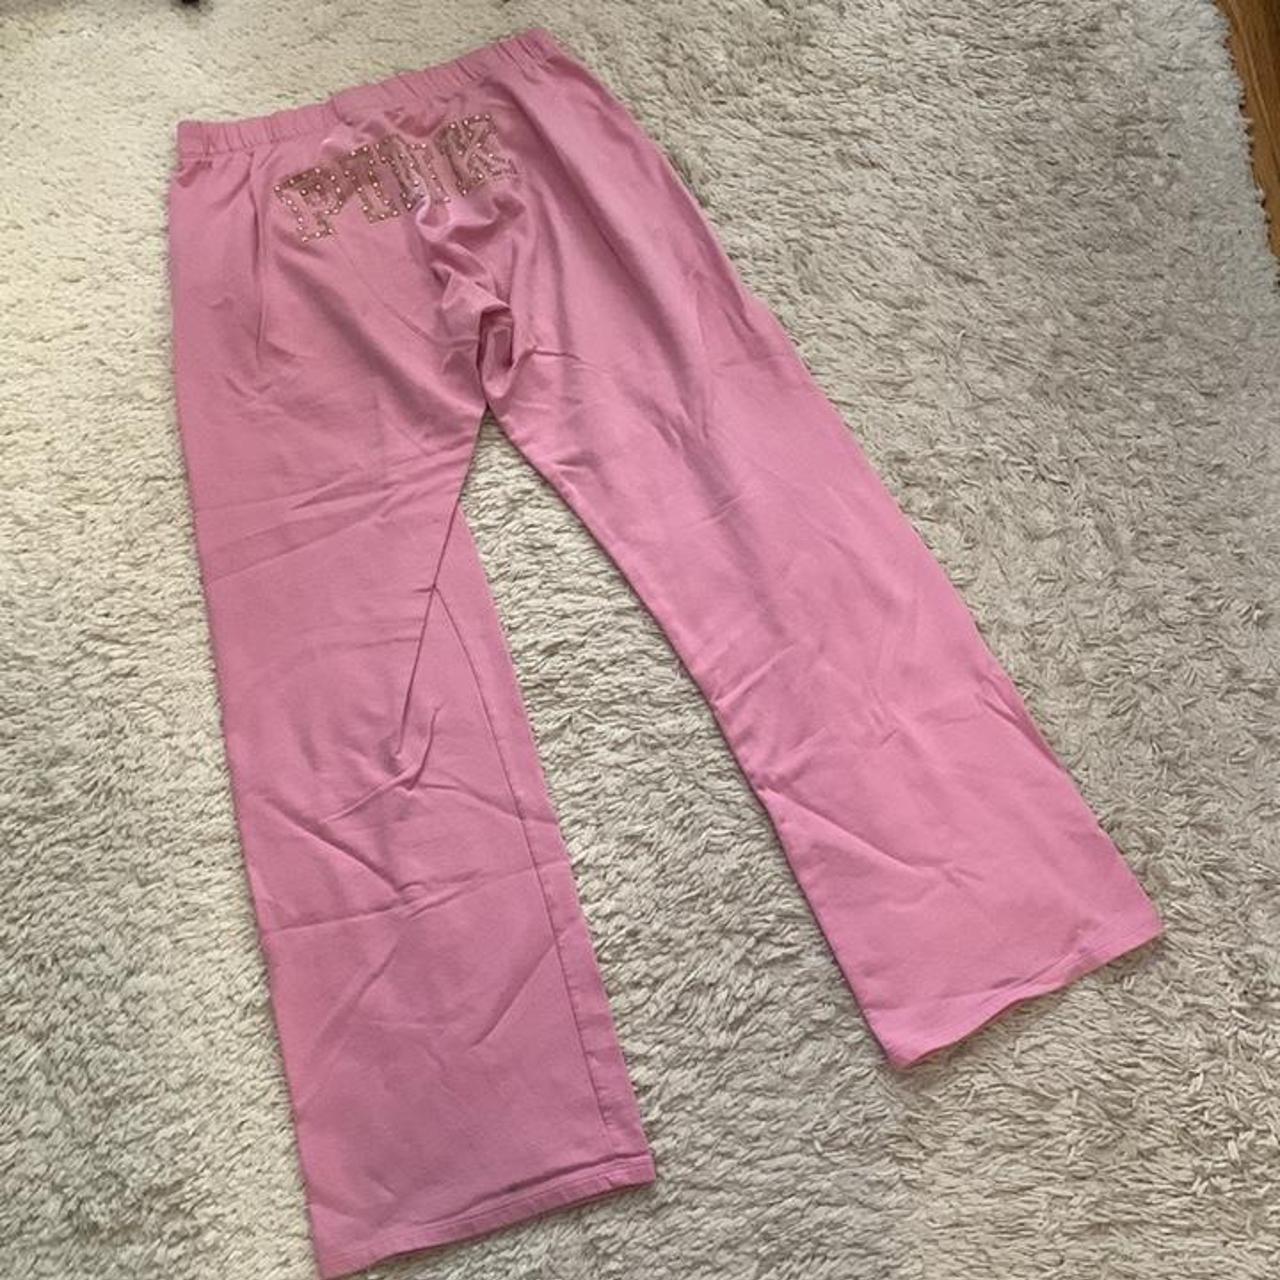 Victoria Secret PINK bling campus Sweat pants size xl Pink And Silver Bling